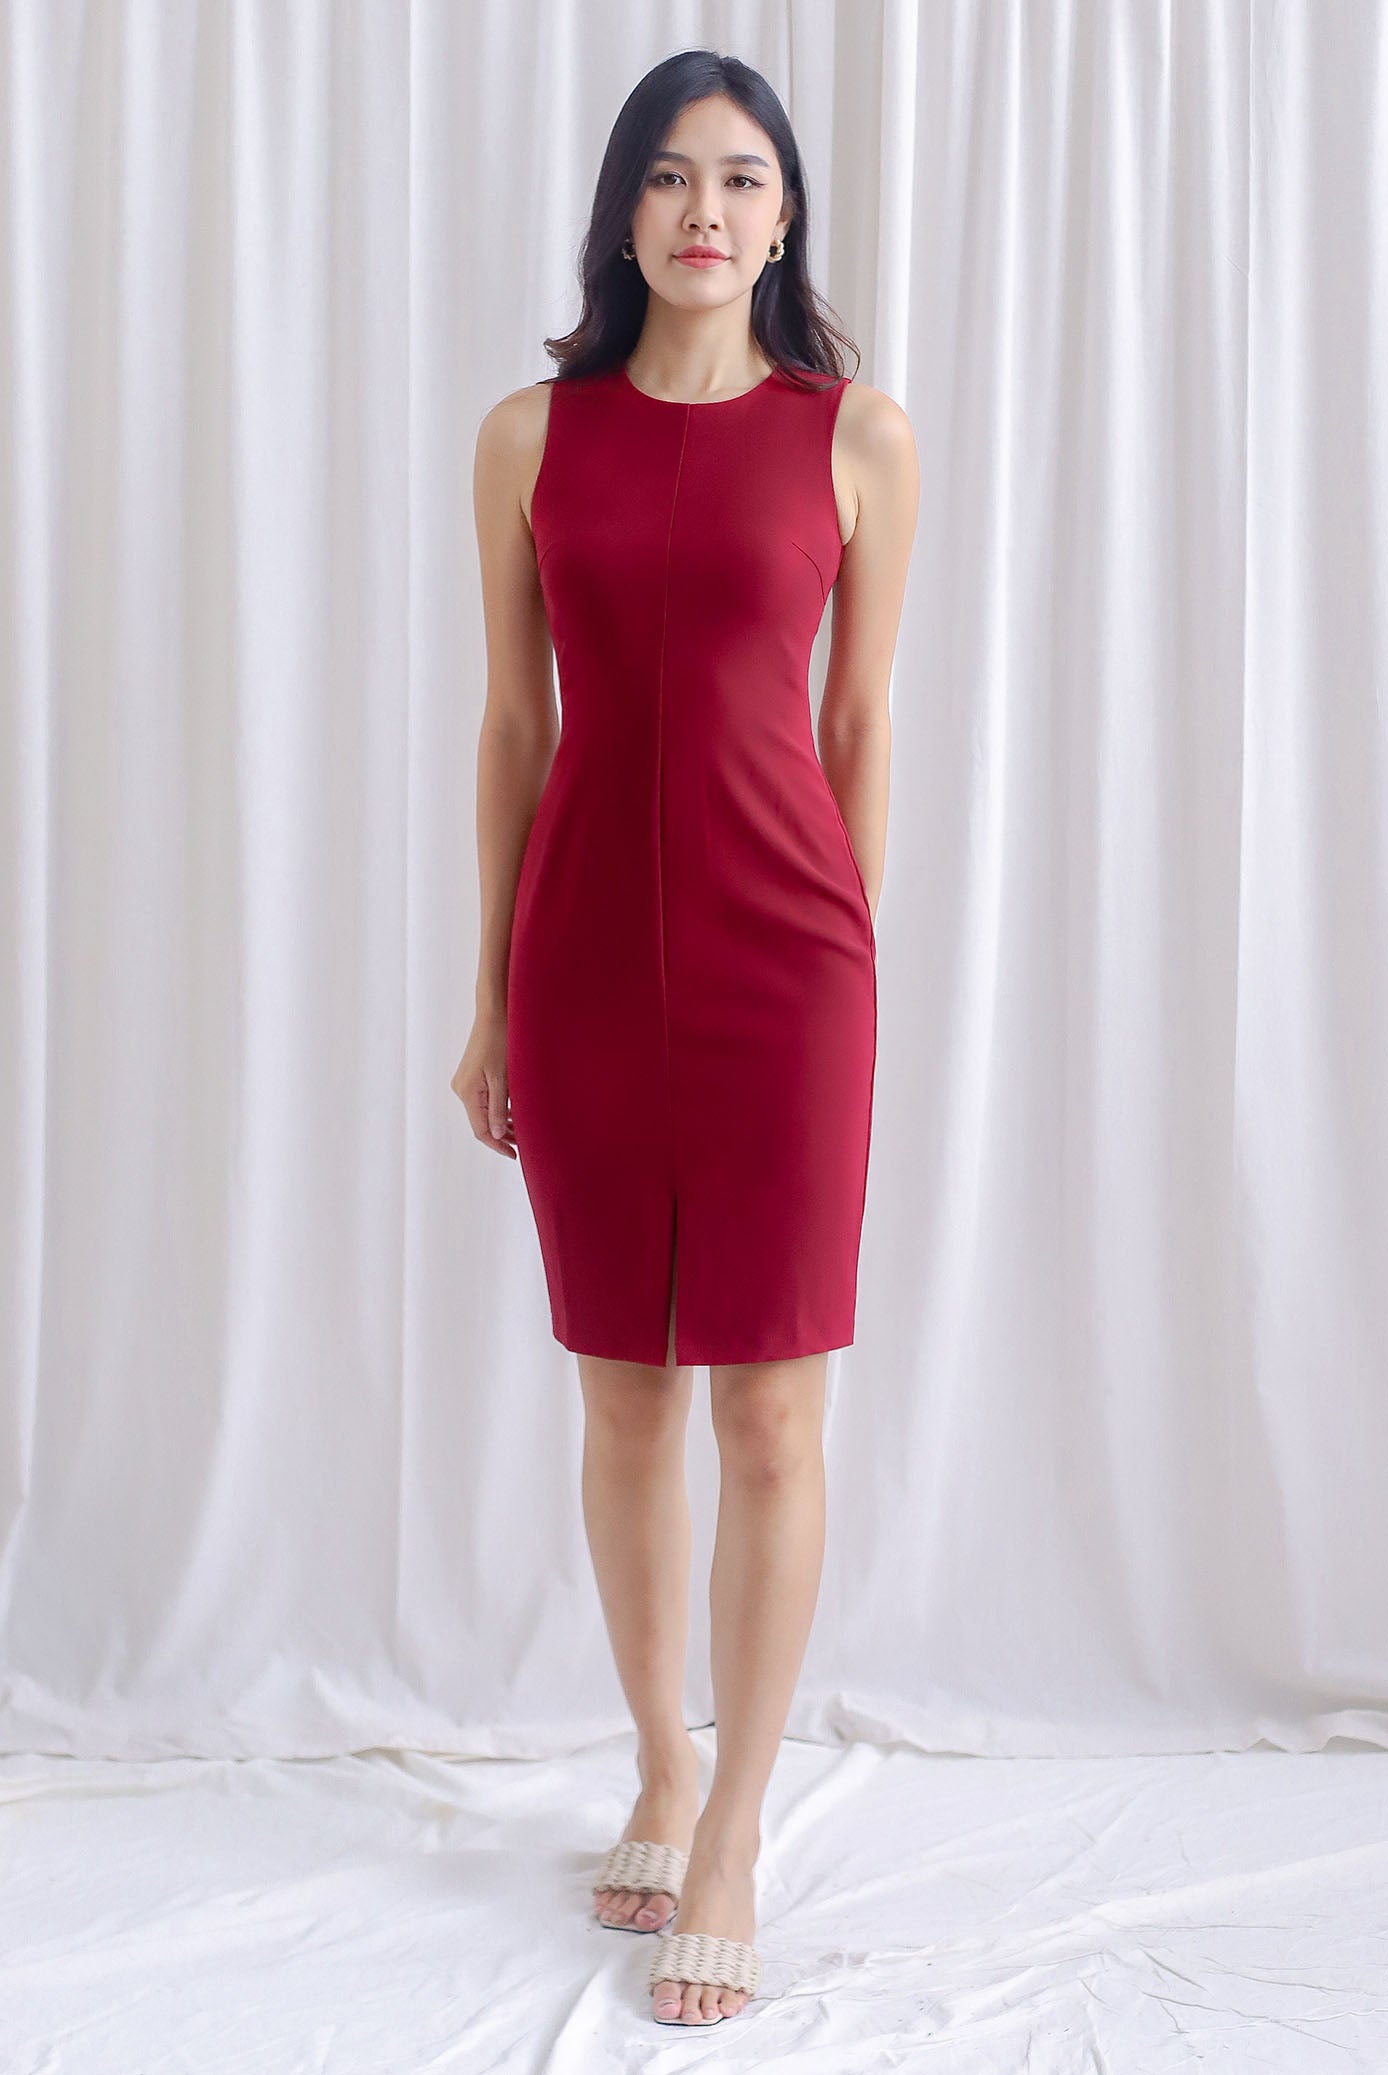 TDC Montrel Classic Work Dress In Berry Red